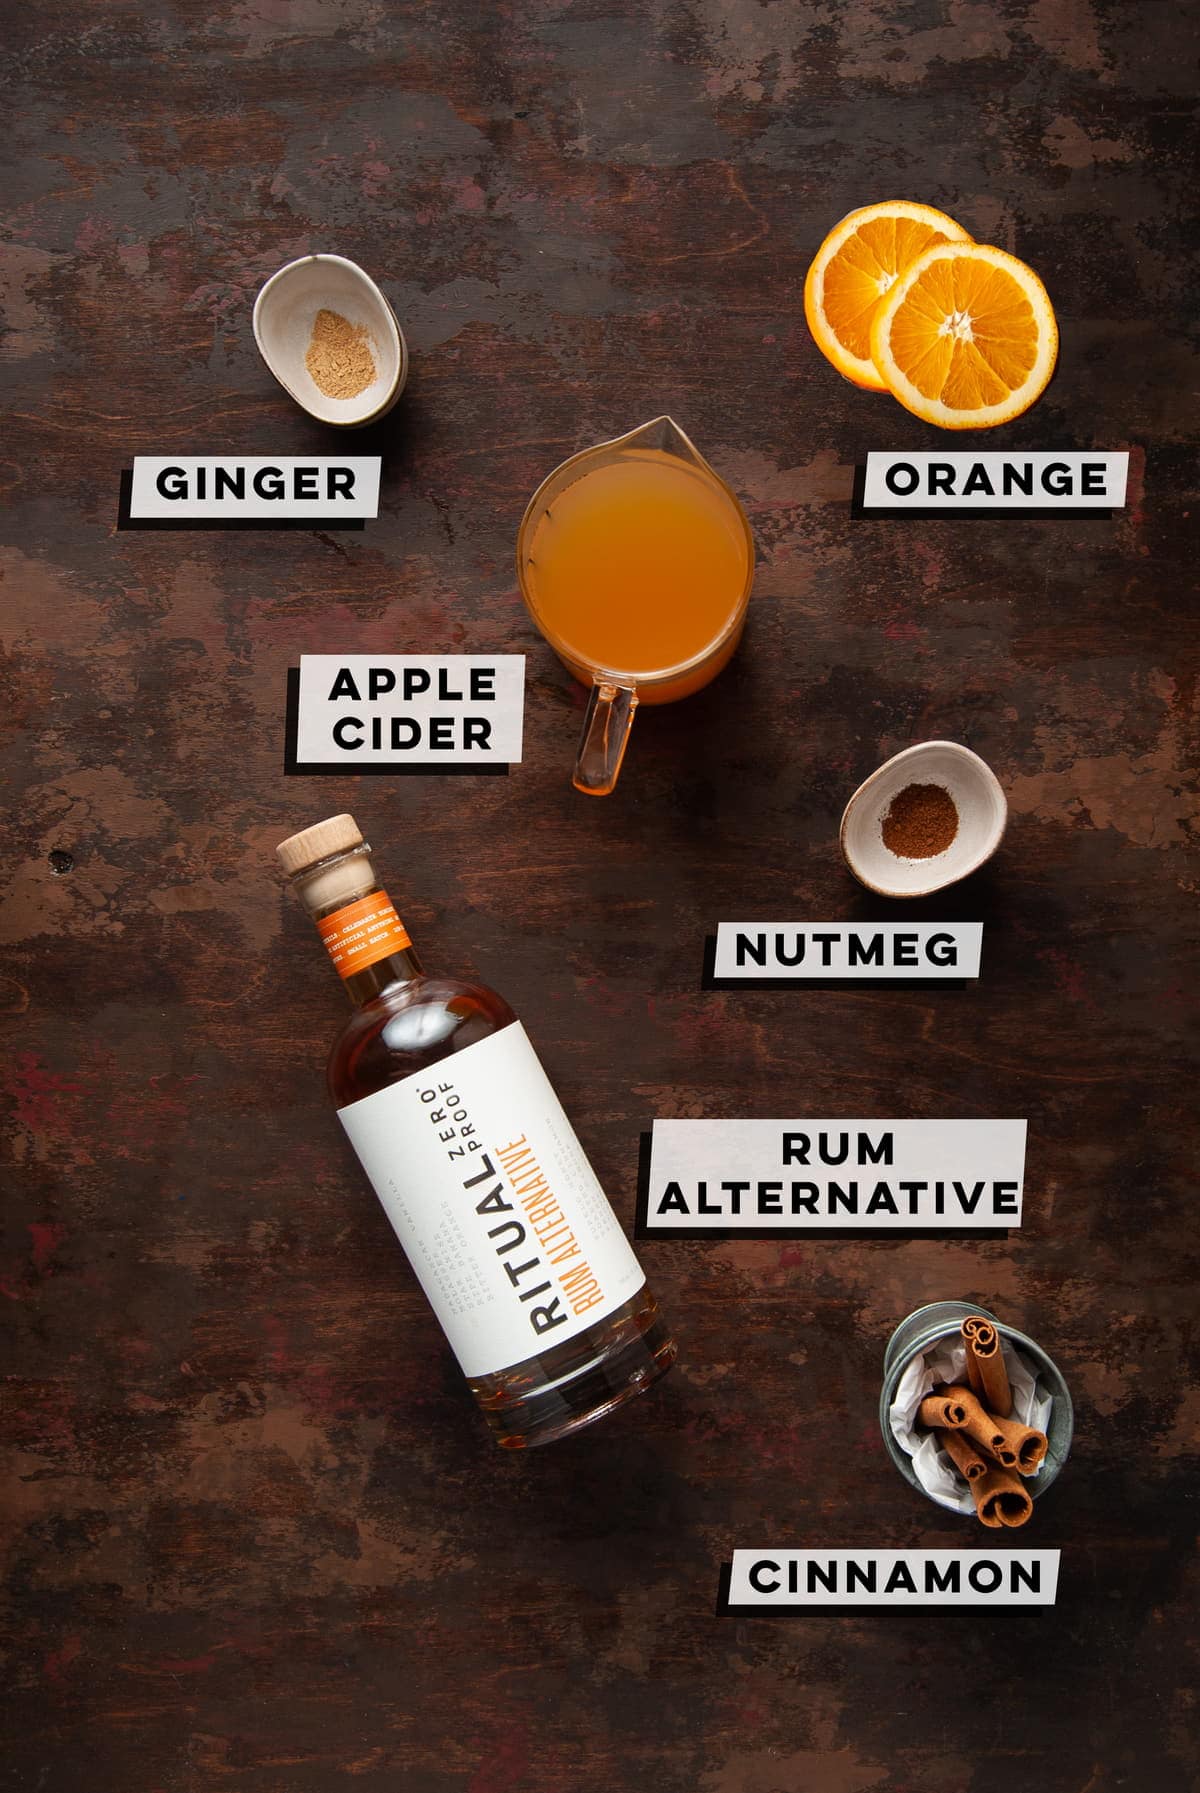 Overhead picture of the ingredients in an apple cider spiced rum mocktail - ginger, apple cider, orange, nutmeg, rum alternative and cinnamon